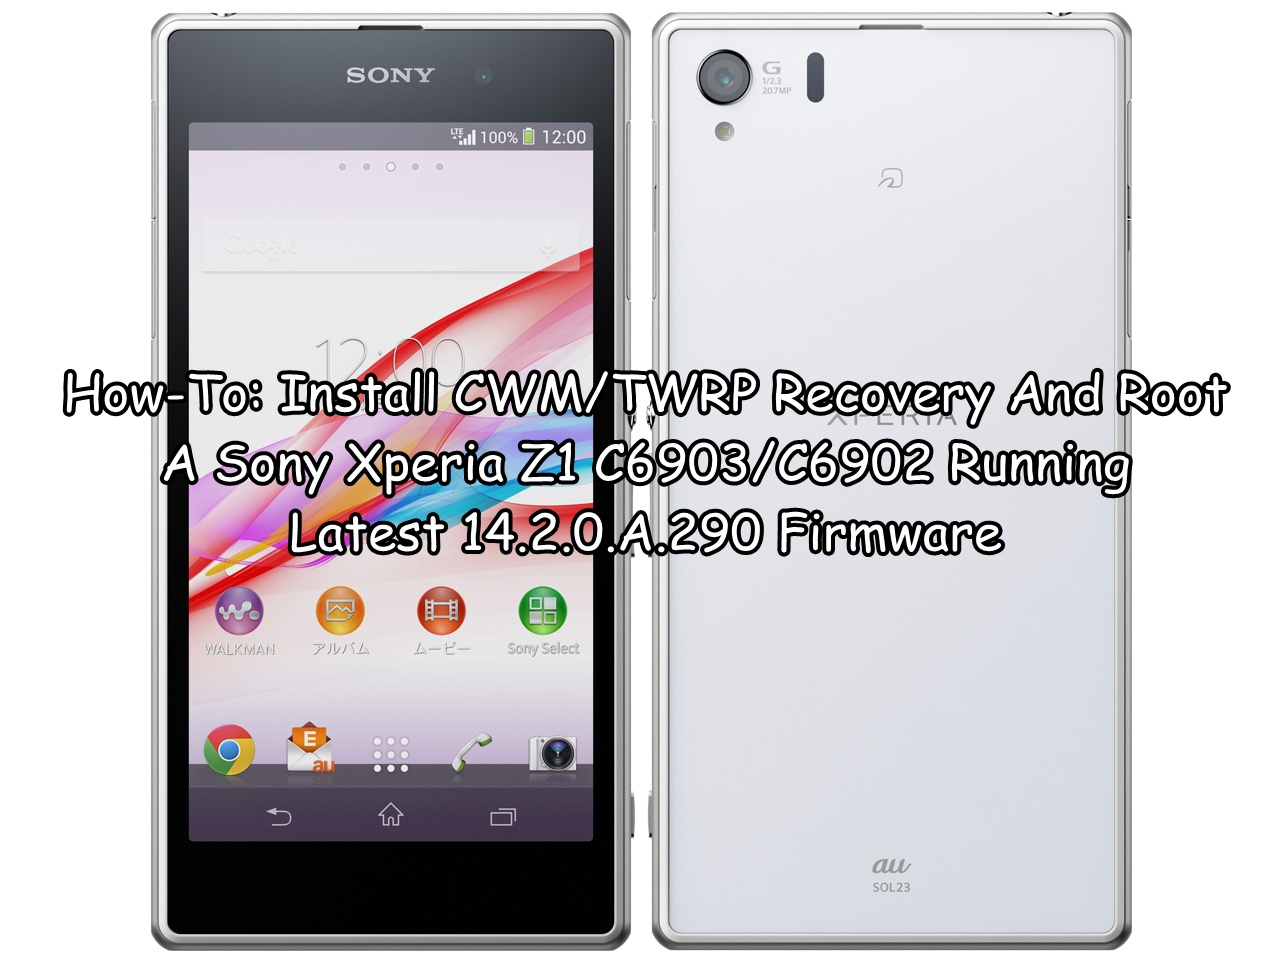 Vlak of Onverschilligheid How-To: Install CWM/TWRP Recovery And Root A Sony Xperia Z1 C6903/C6902  Running Latest 14.2.0.A.290 Firmware – Android Reviews | How To Guides